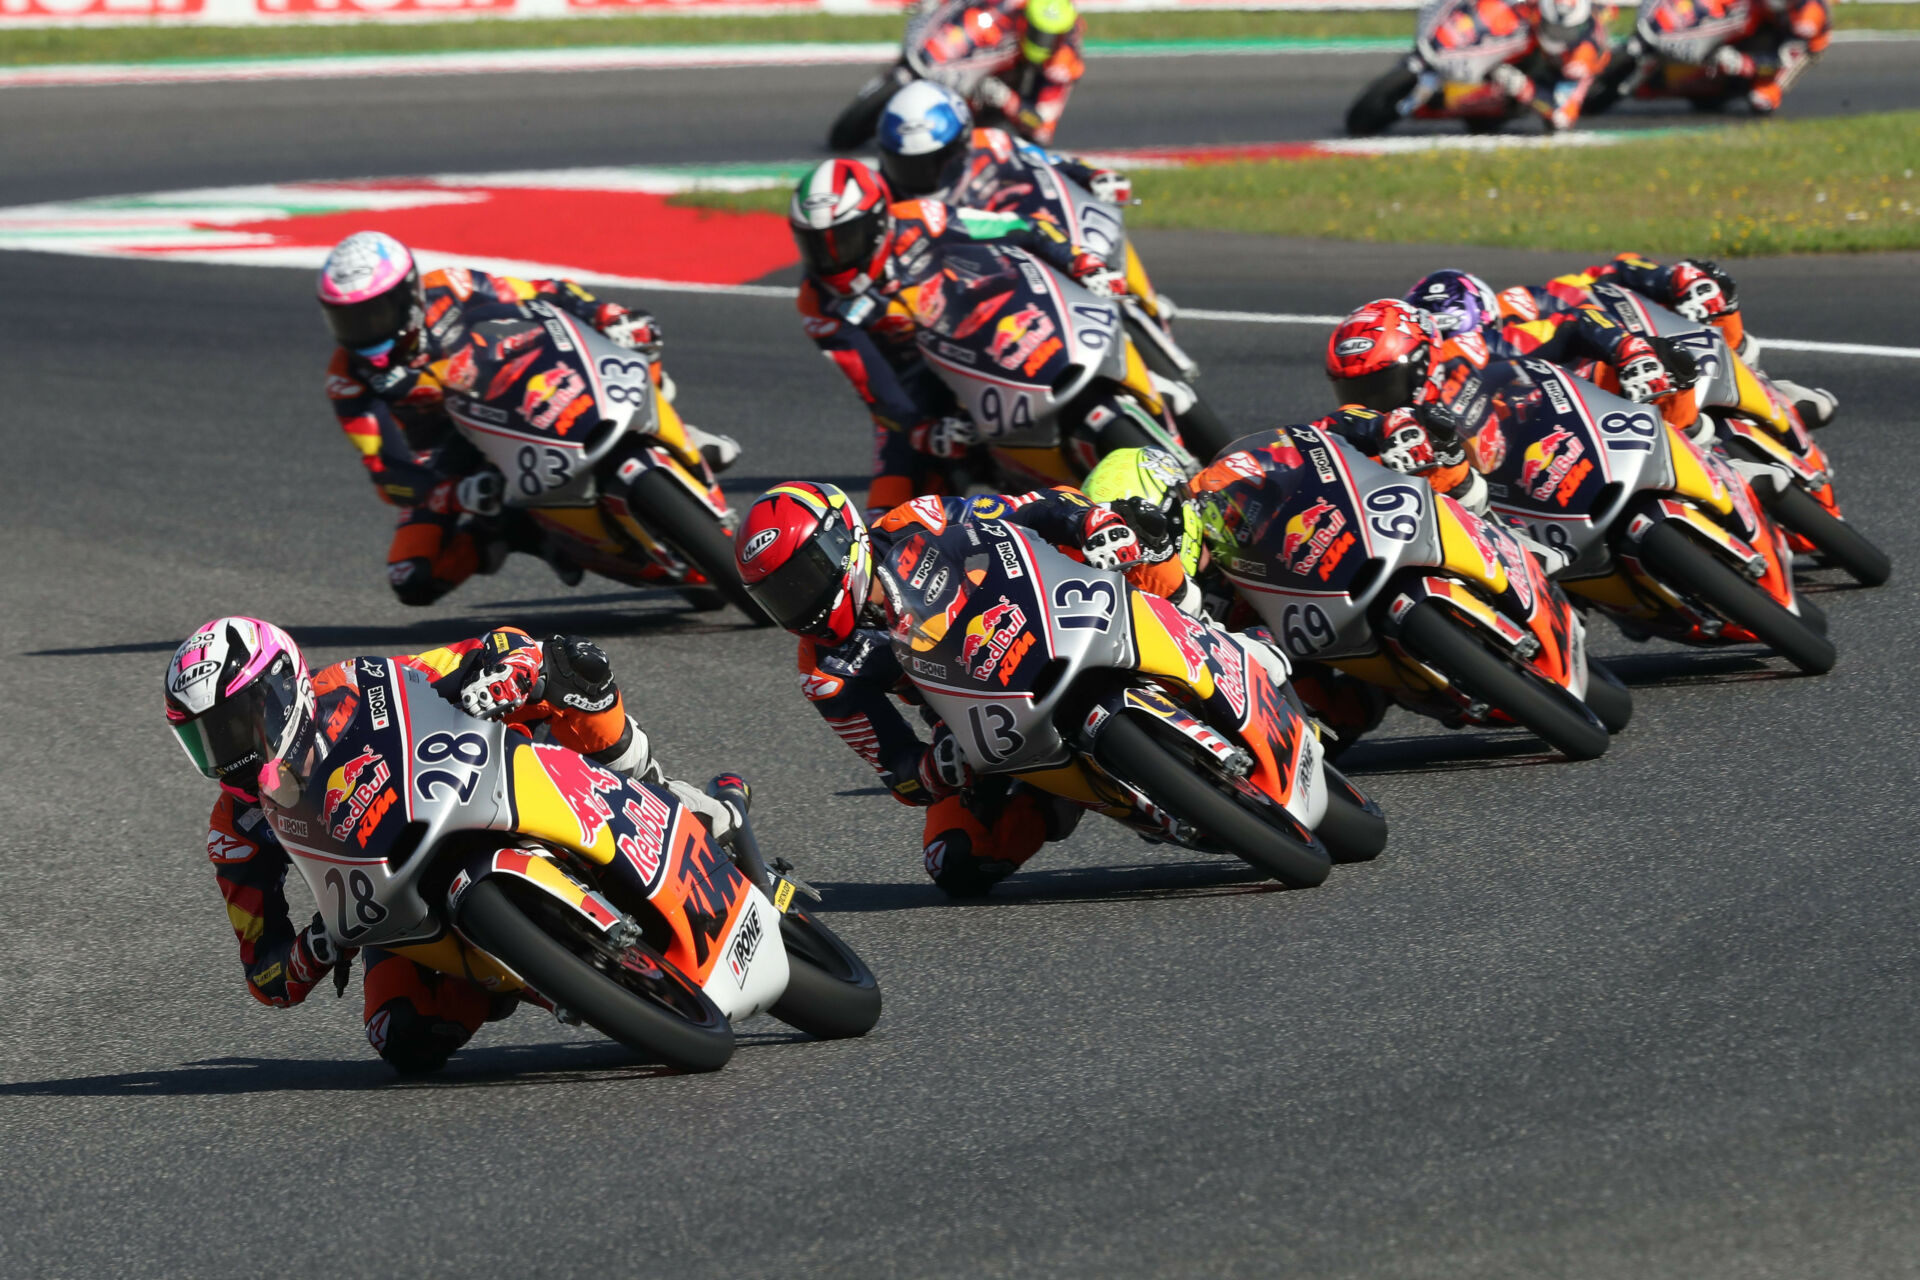 Màximo Quiles (28) leading Red Bull MotoGP Rookies Cup Race Two at Mugello. Photo courtesy Red Bull.